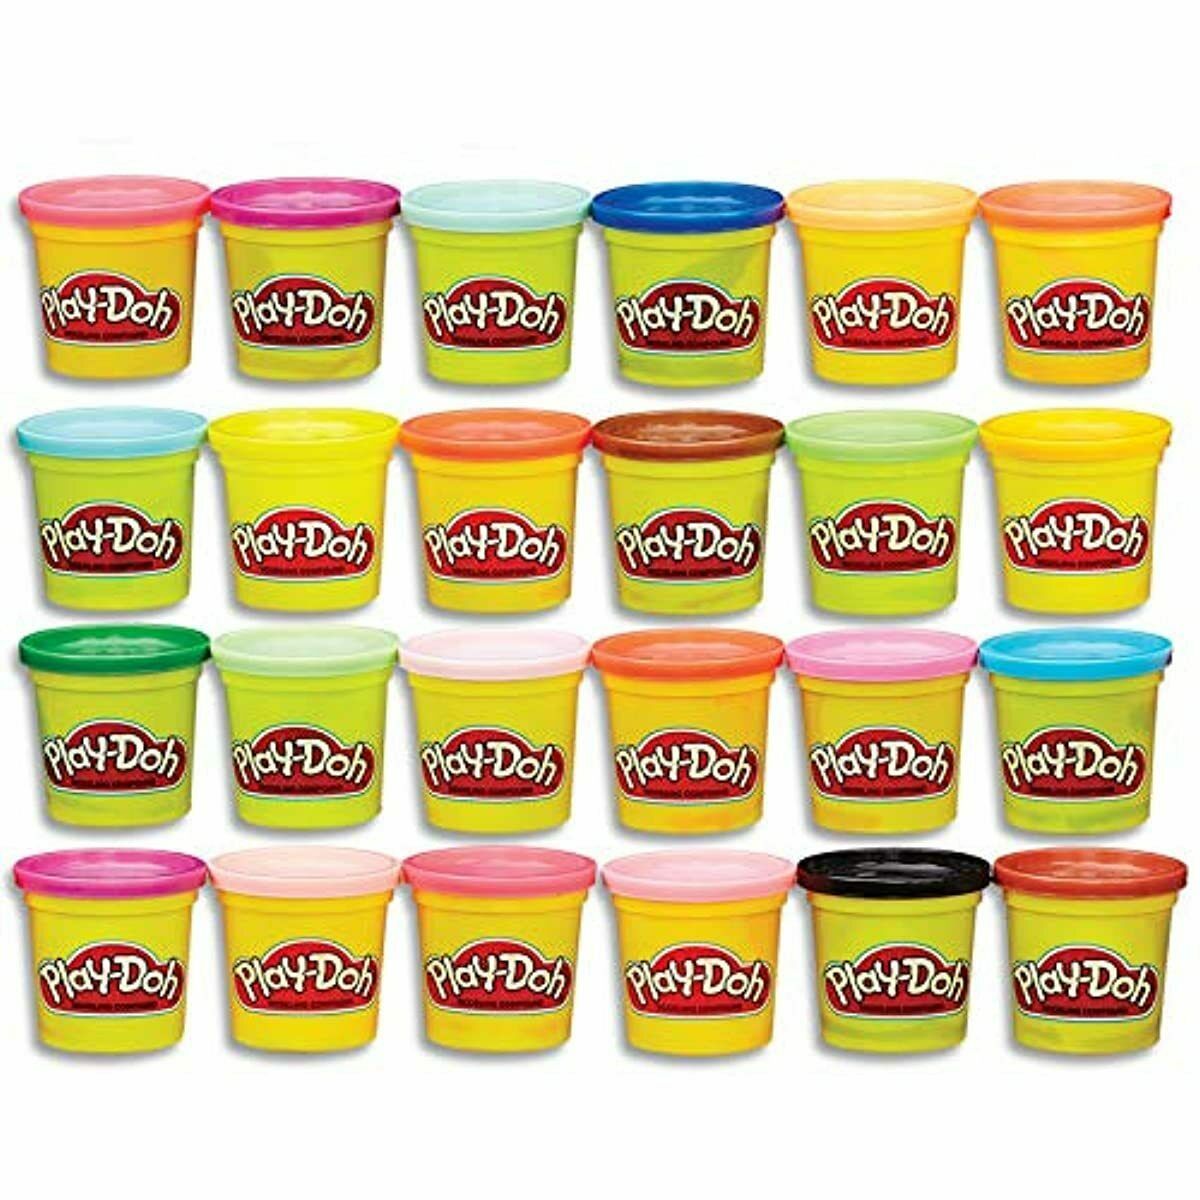 Play-doh Modeling Compound 24-pack Case Of Colors, Non-toxic, Multi-color, 3-oun